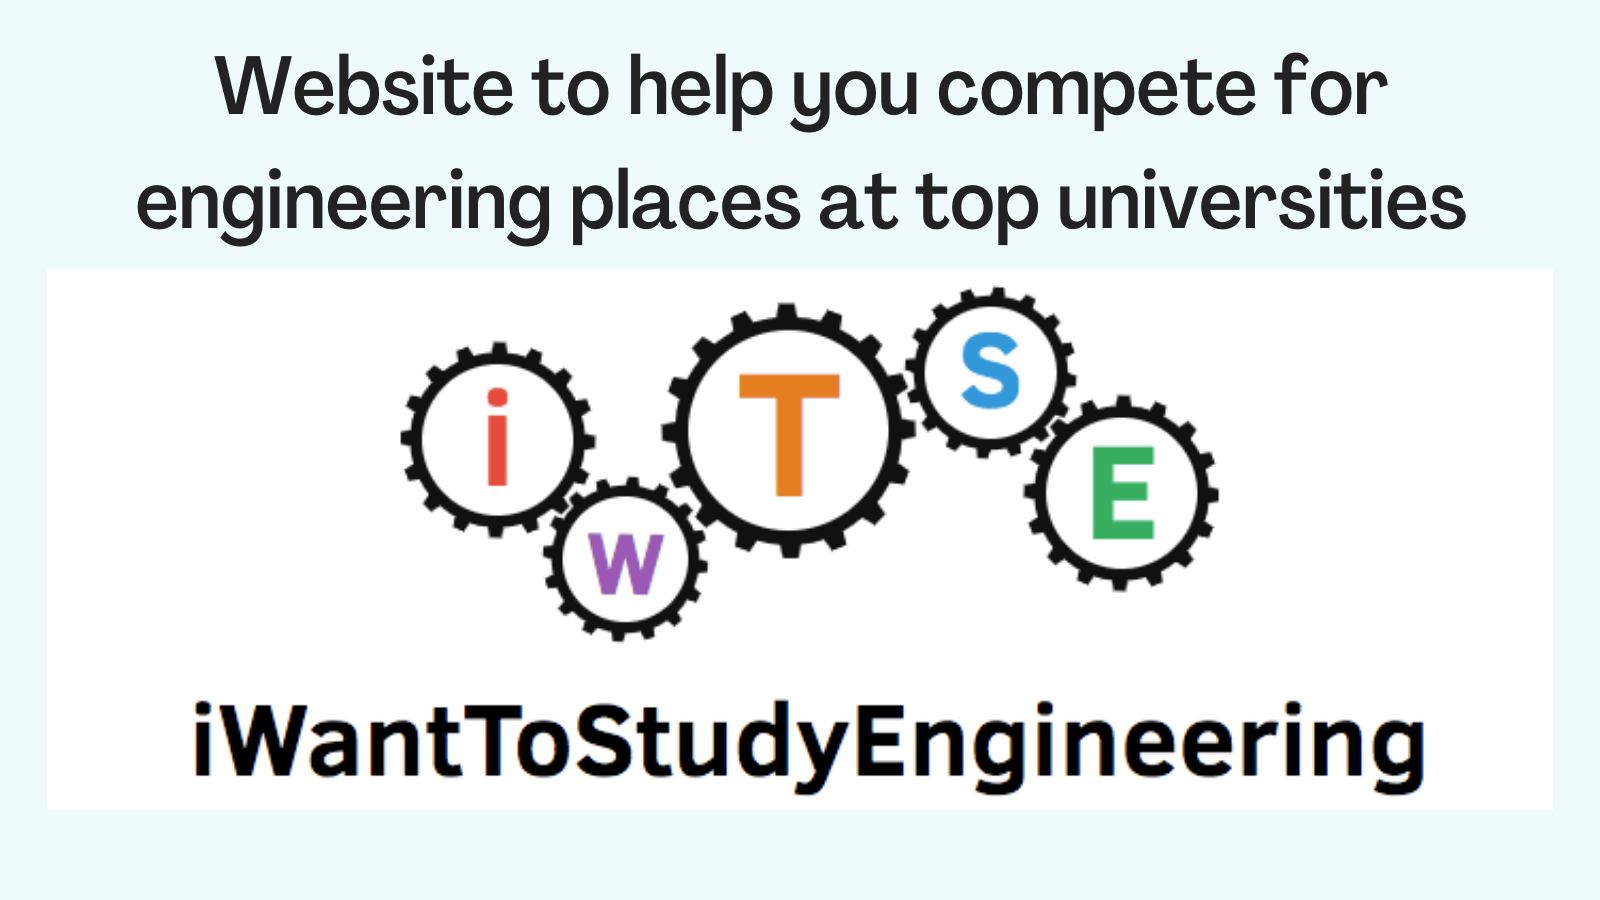 I want to study Engineering resource poster